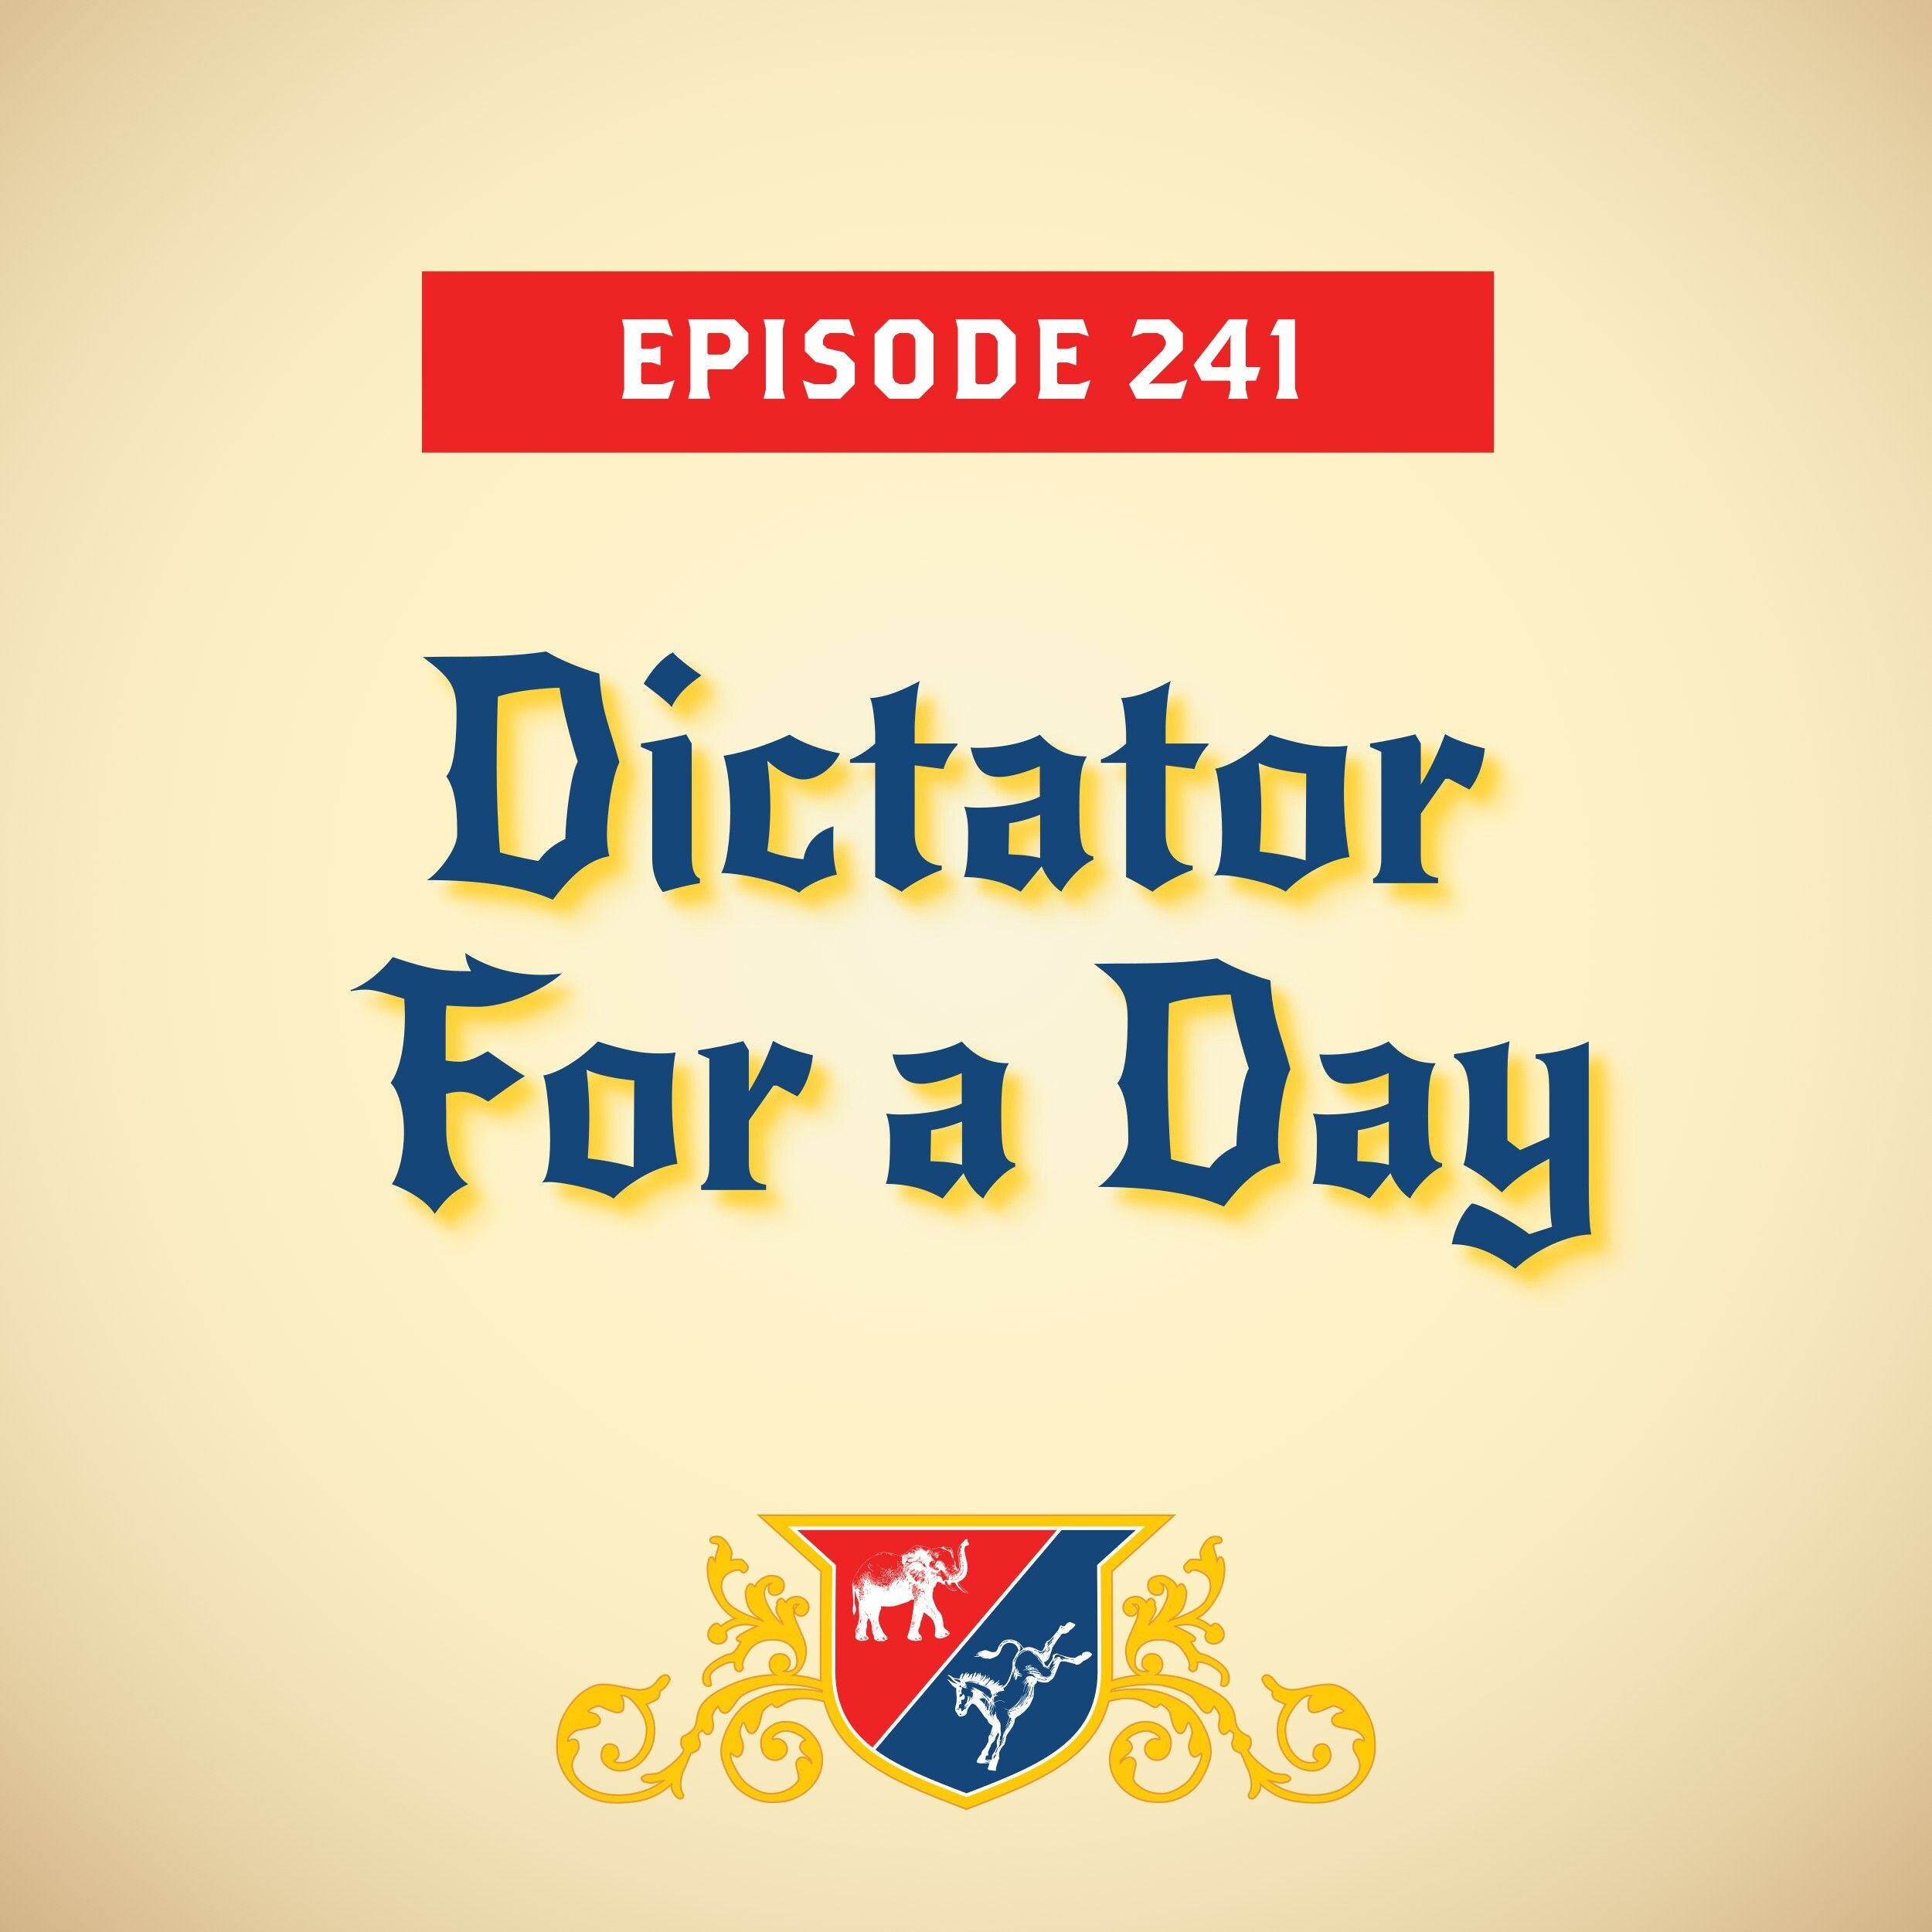 Dictator for a Day